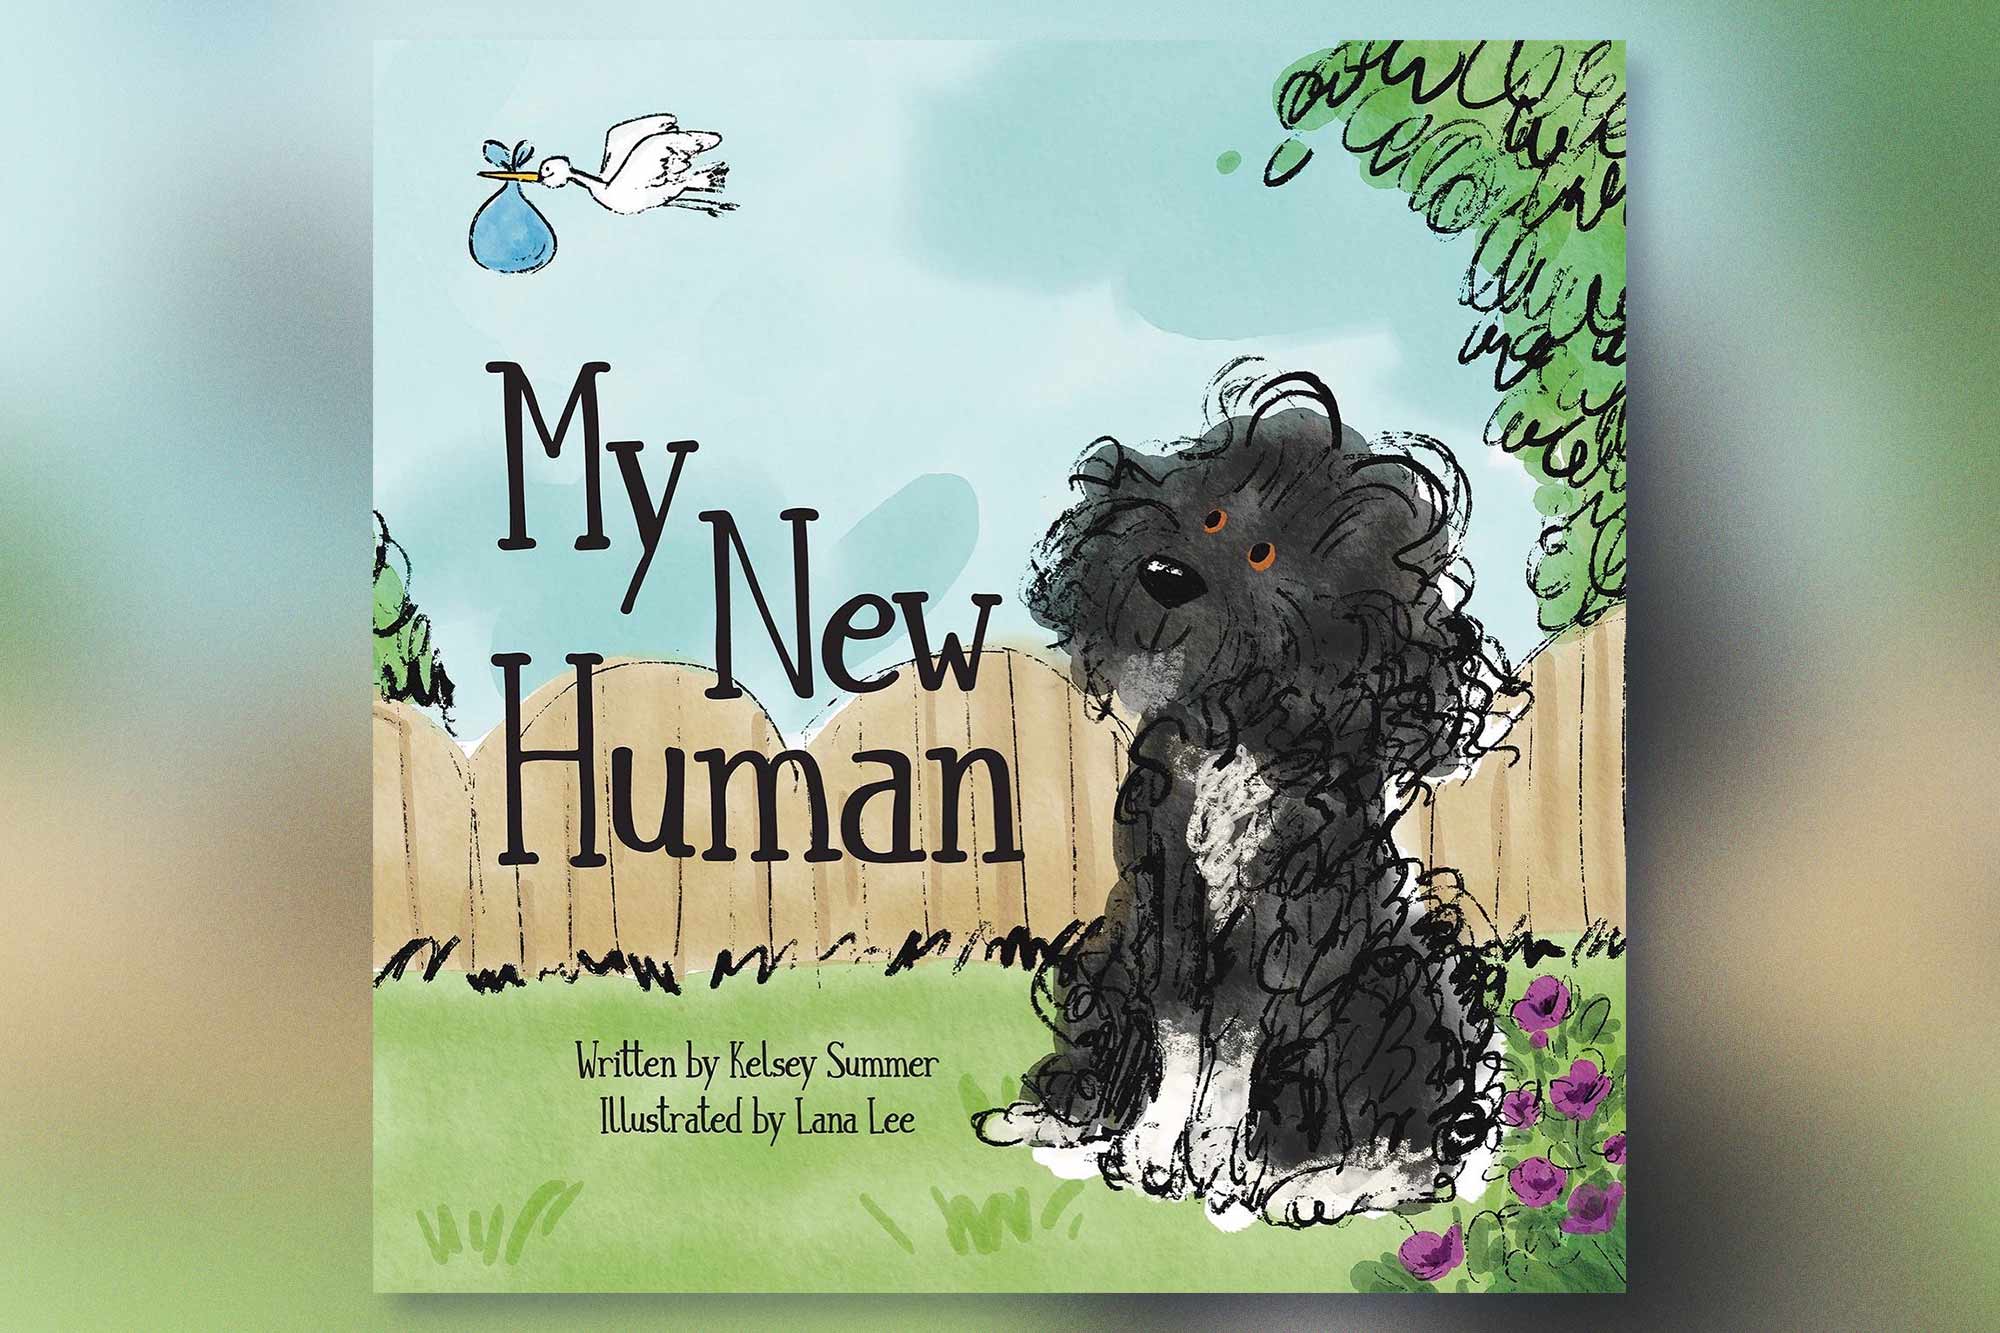 The cover of a children's book called My New Human features a black and white labradoodle and a stork carrying a blue sack